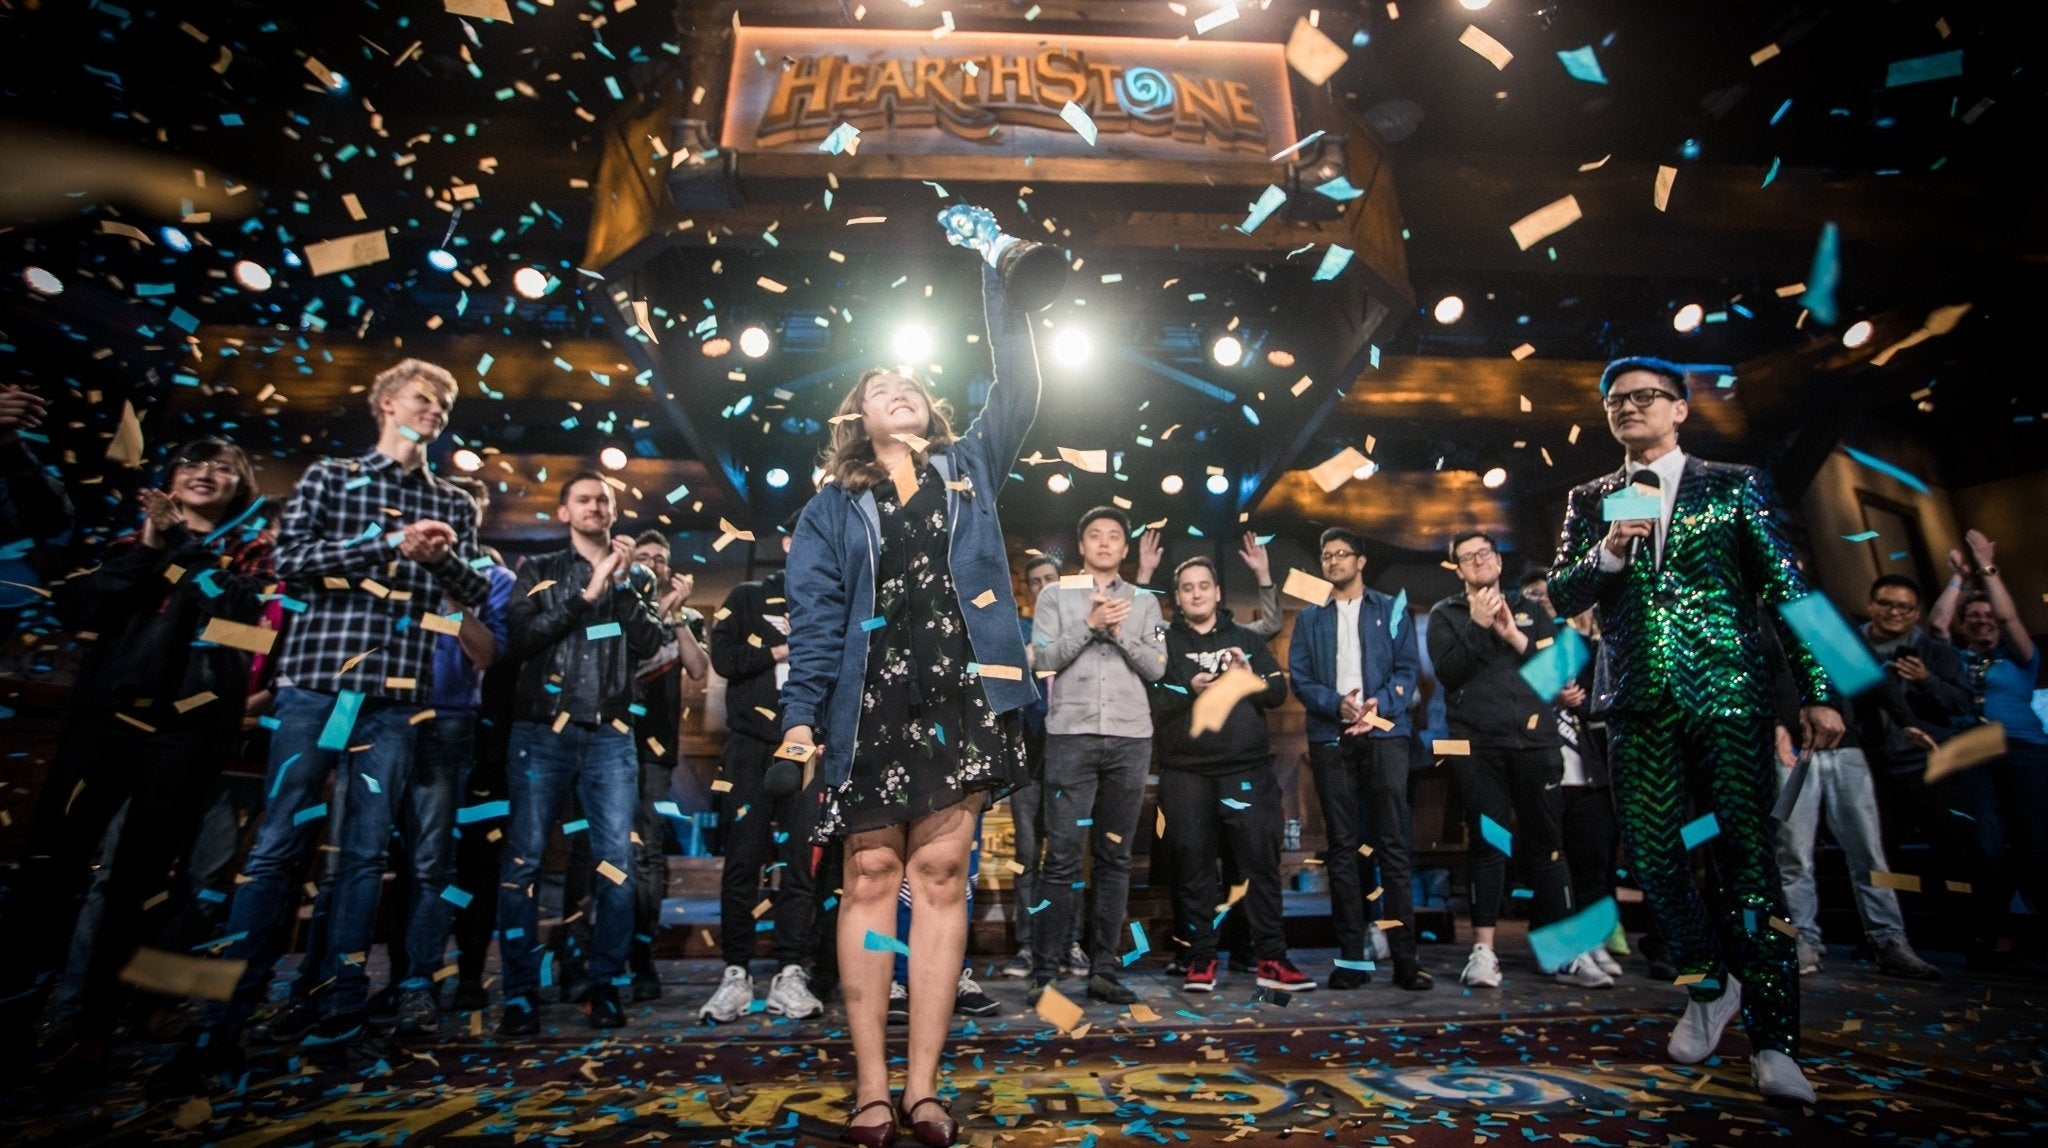 Image for Hearthstone player VKLiooon becomes first woman to win BlizzCon championship